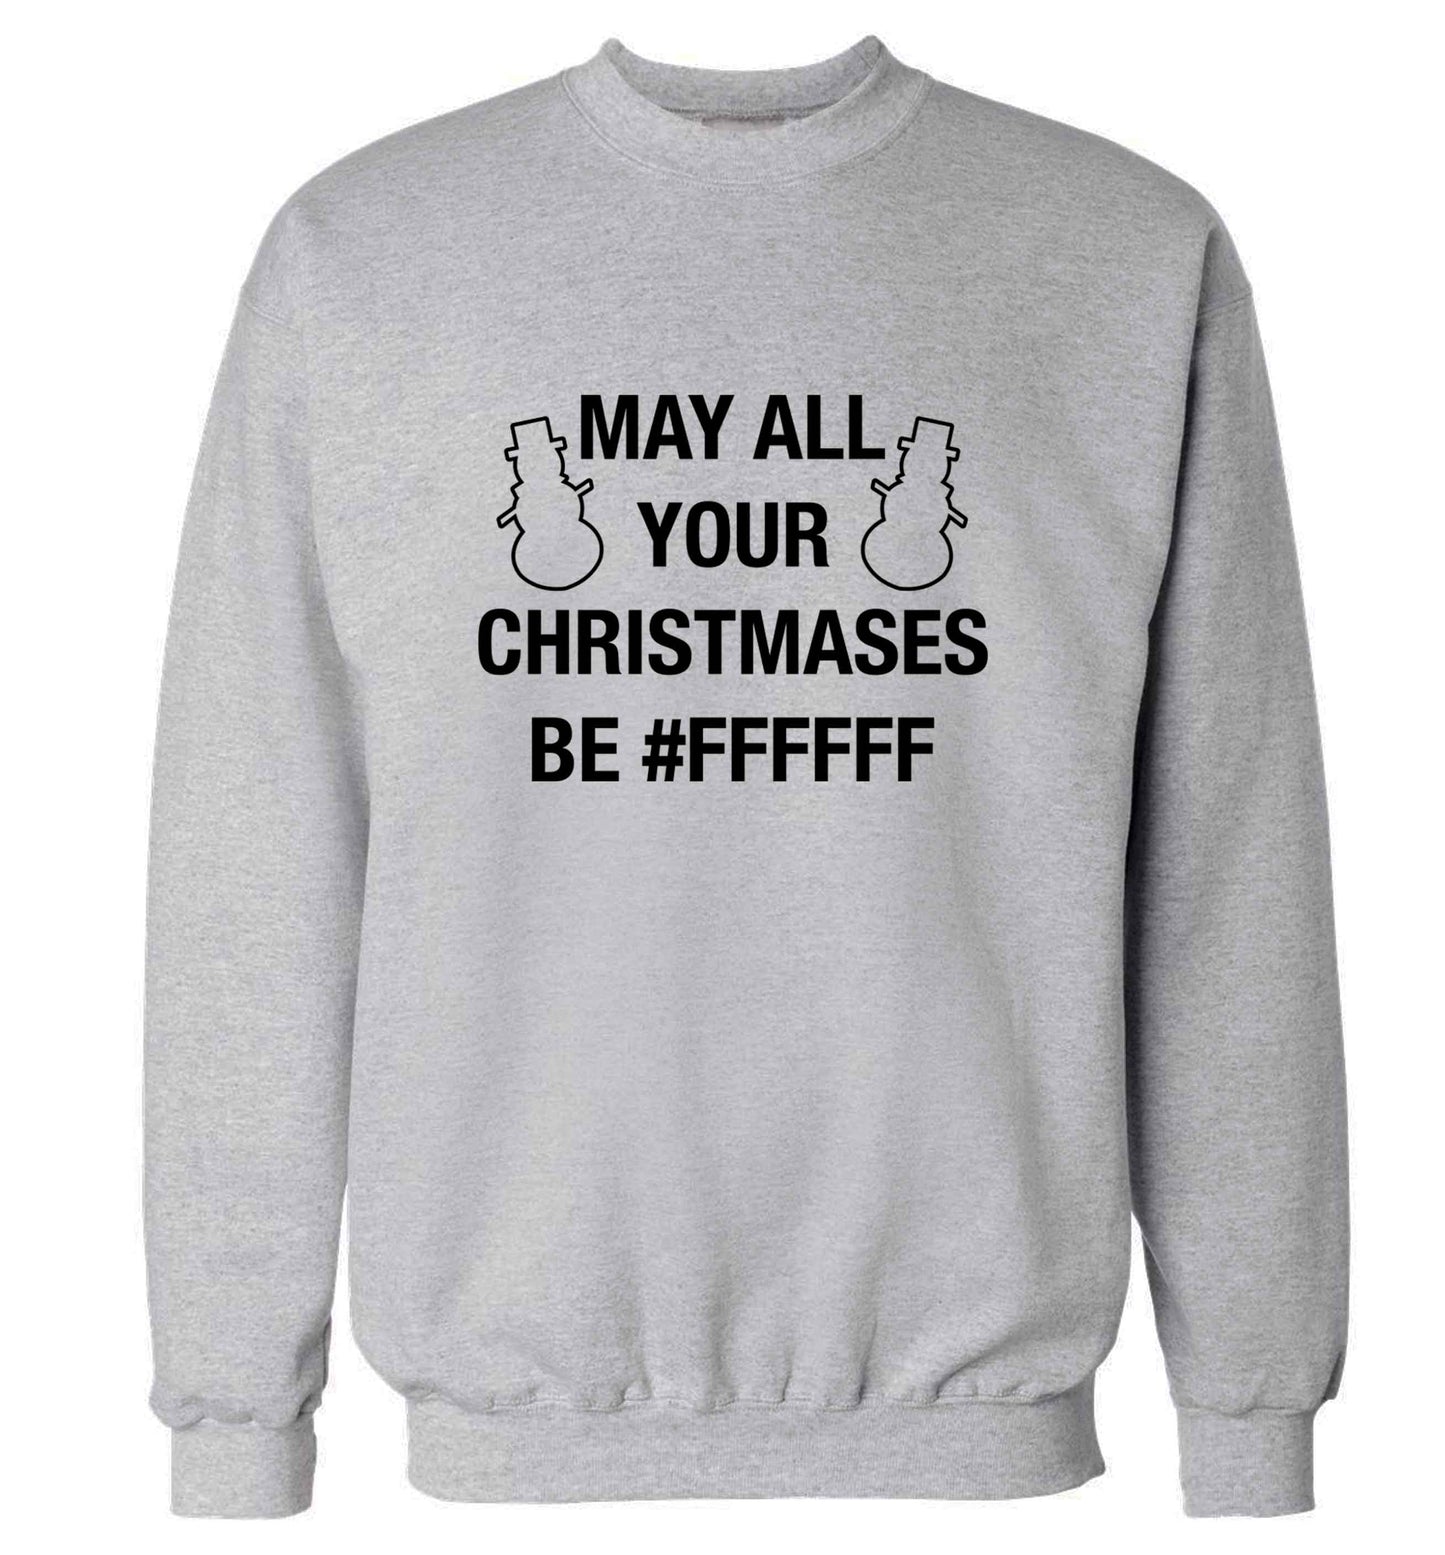 May all your Christmases be #FFFFFF adult's unisex grey sweater 2XL